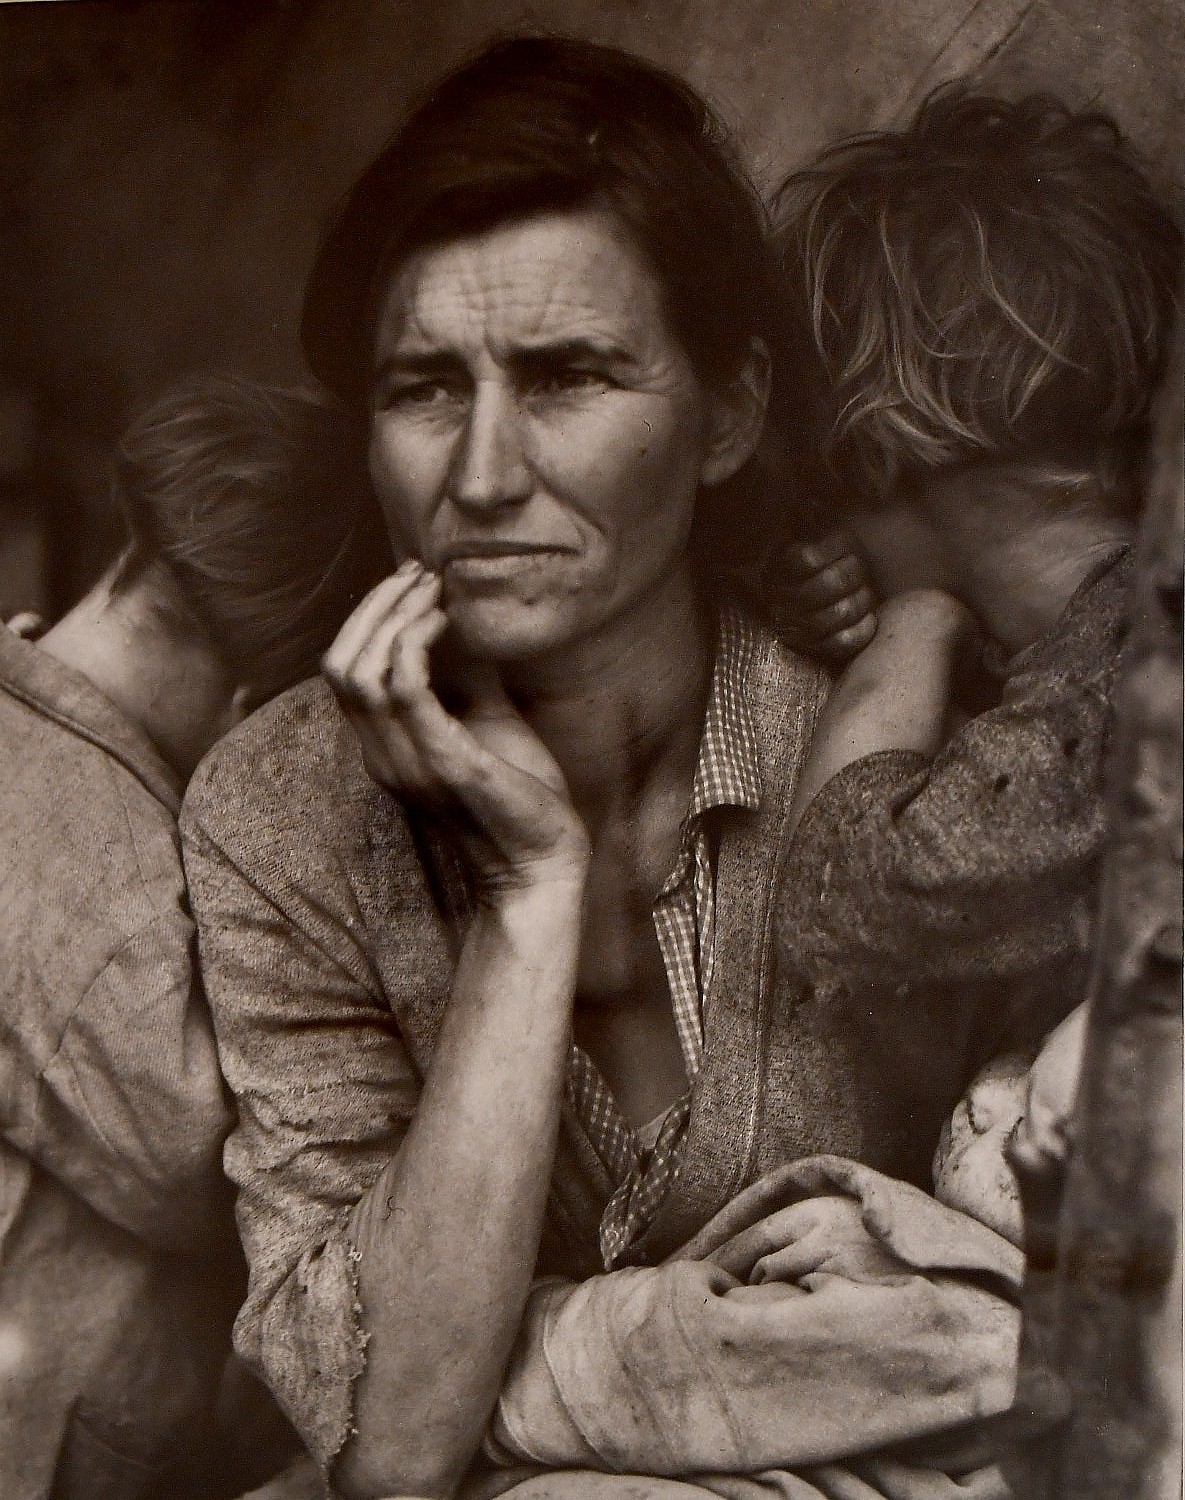 One of the most famous photos of all time, Dorothea Lange’s “Migrant Mother, Nipomo California” (1936) is on view in “Light Works: 100 Years of Photos” at NCMA © 2016 Karen Rubin/goingplacesfarandnear.com